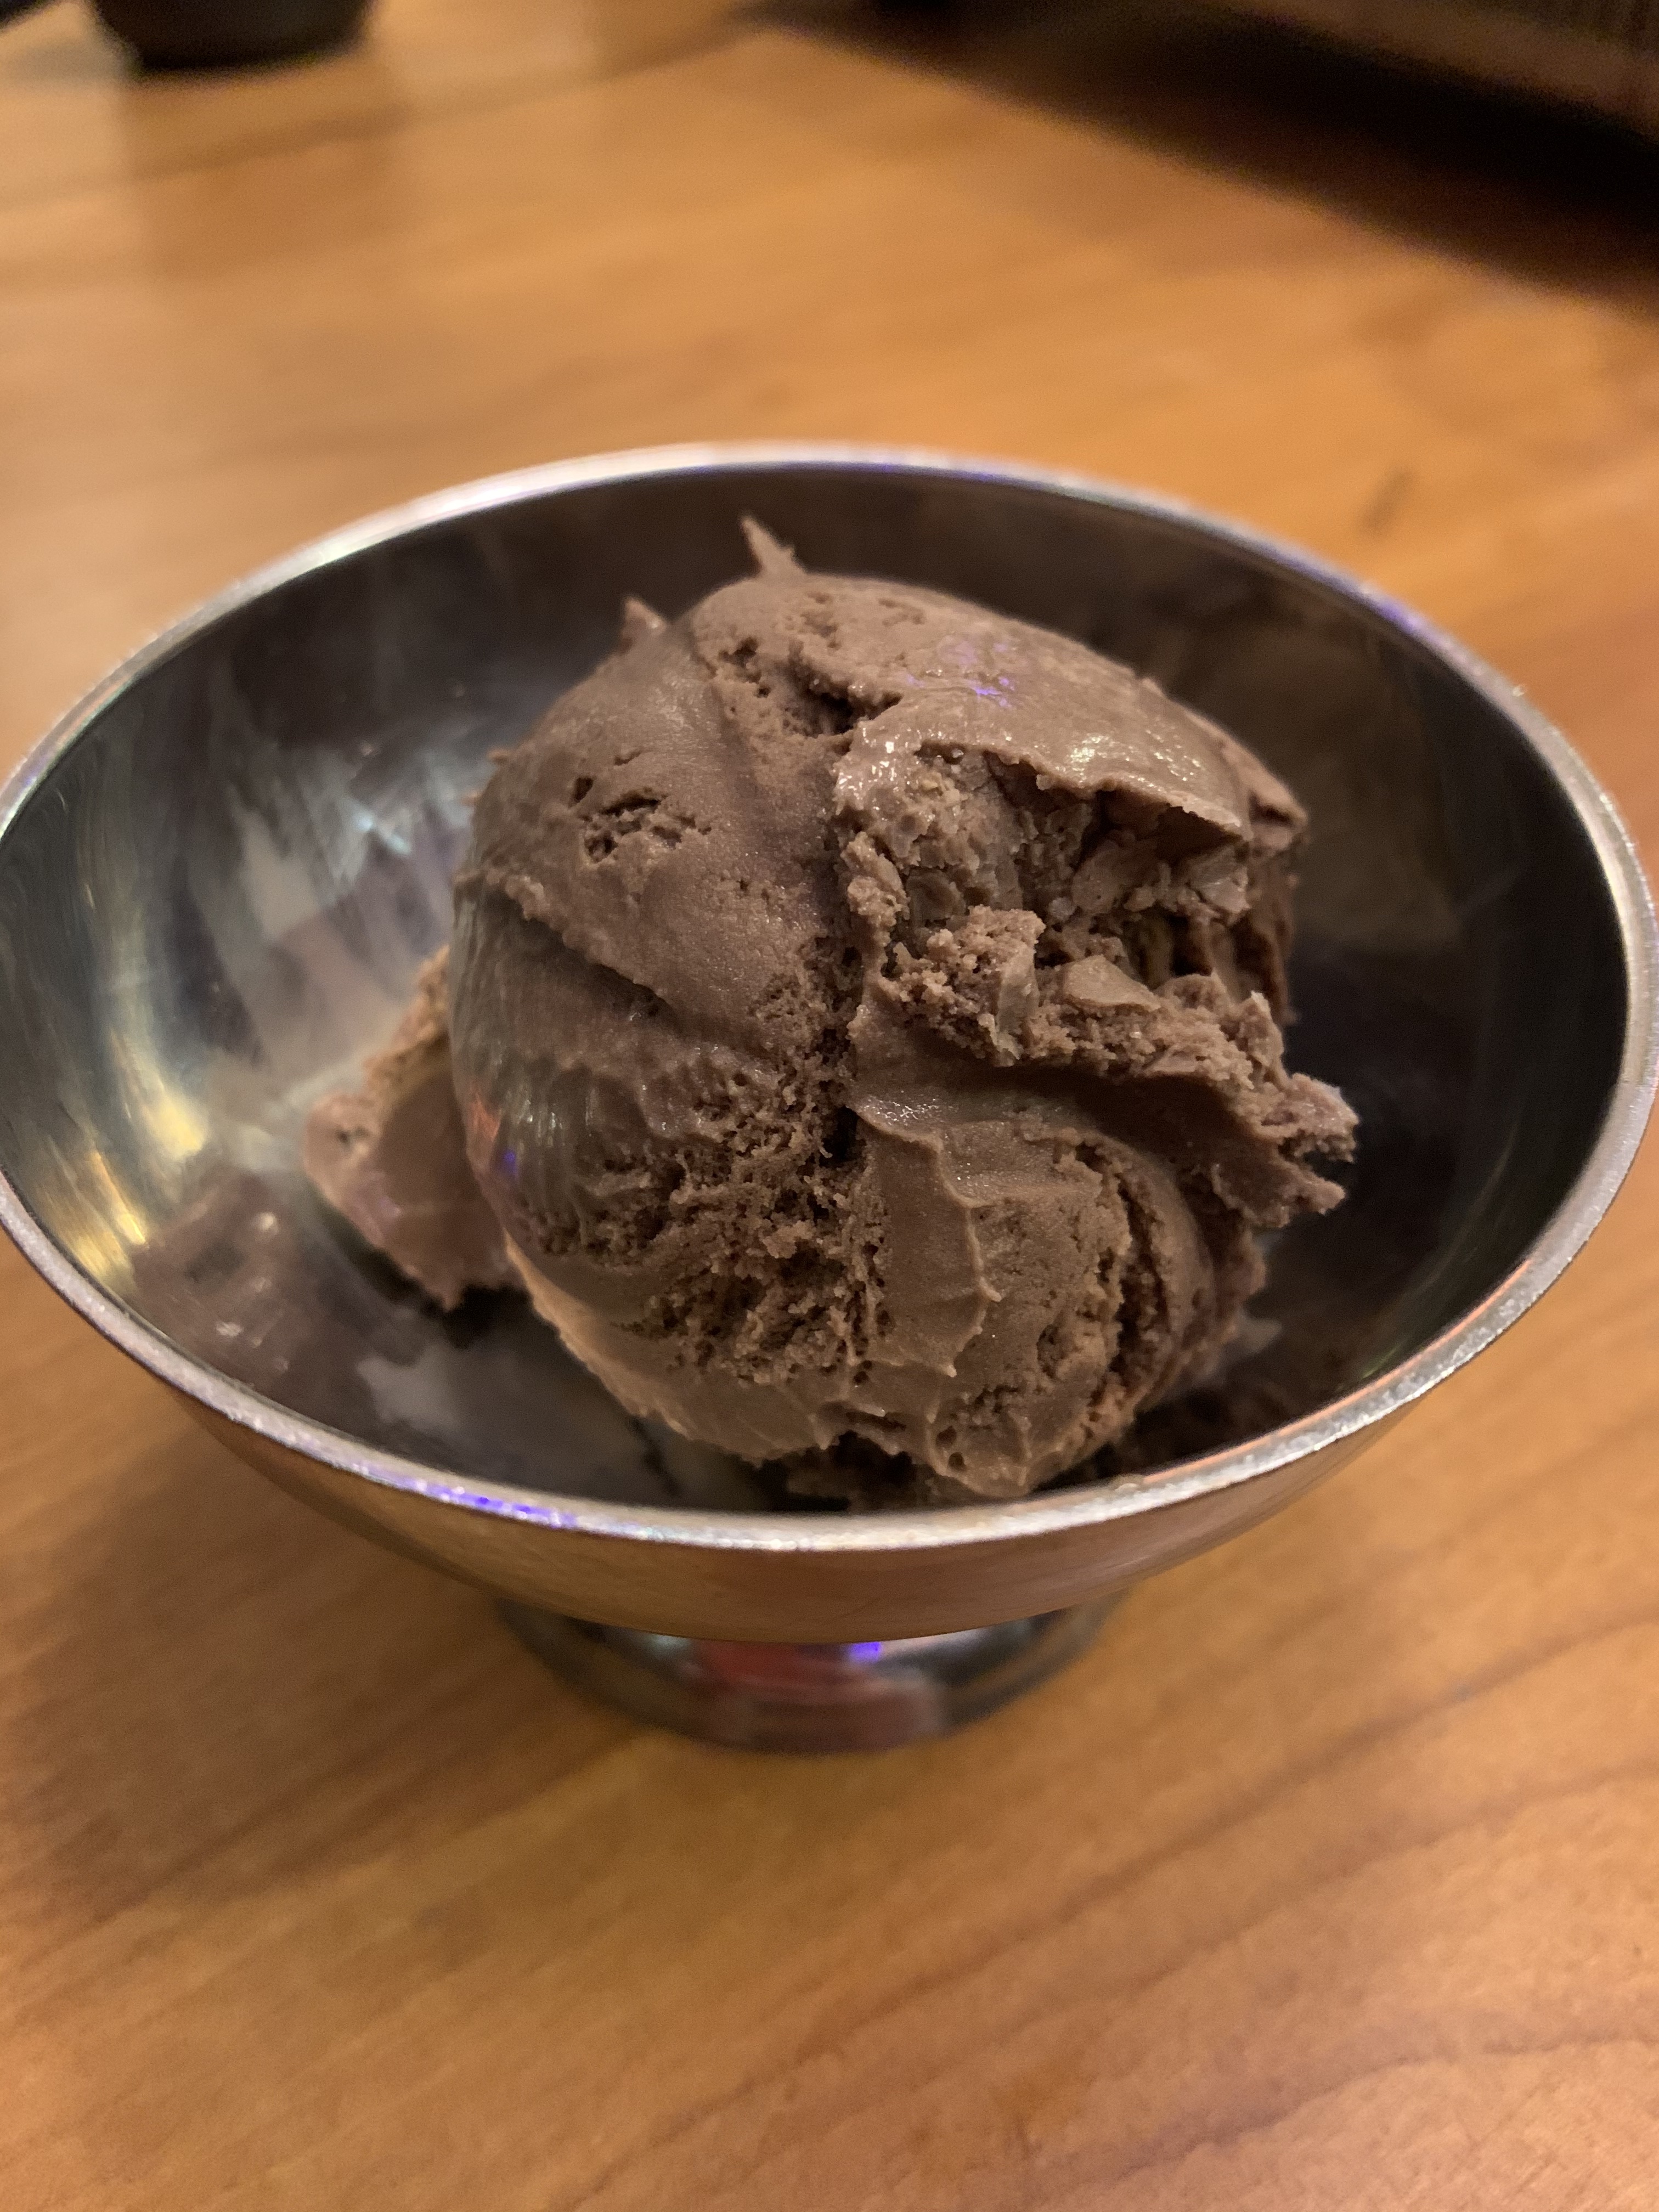 a single scoop of chocolate ice cream in a silver bowl